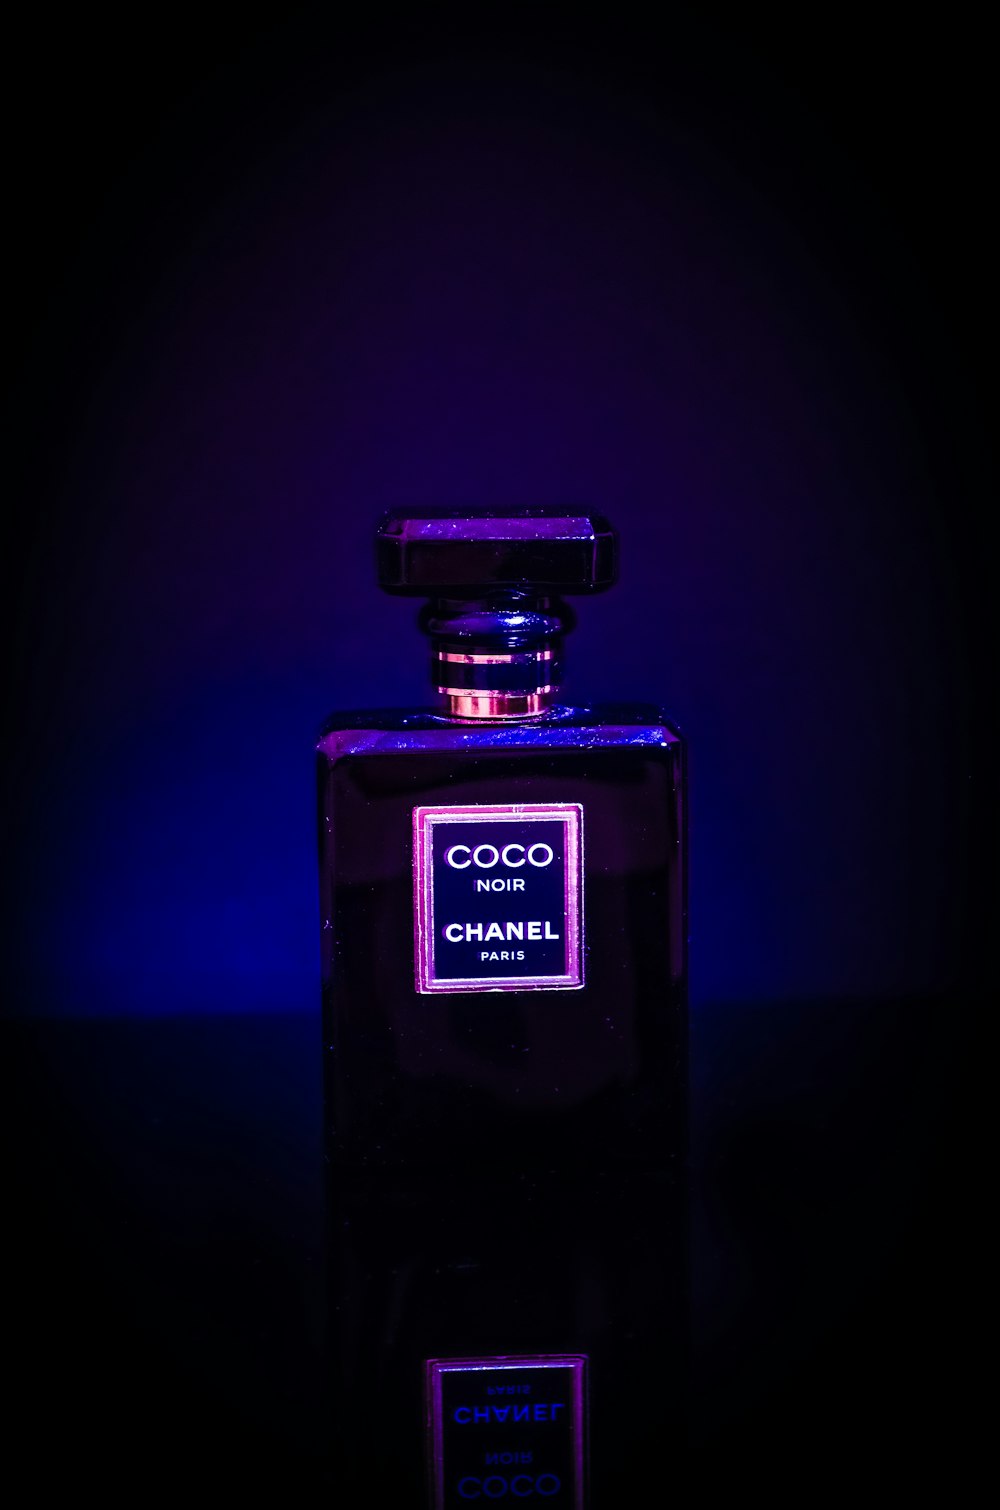 a bottle of chanel perfume lit up in the dark